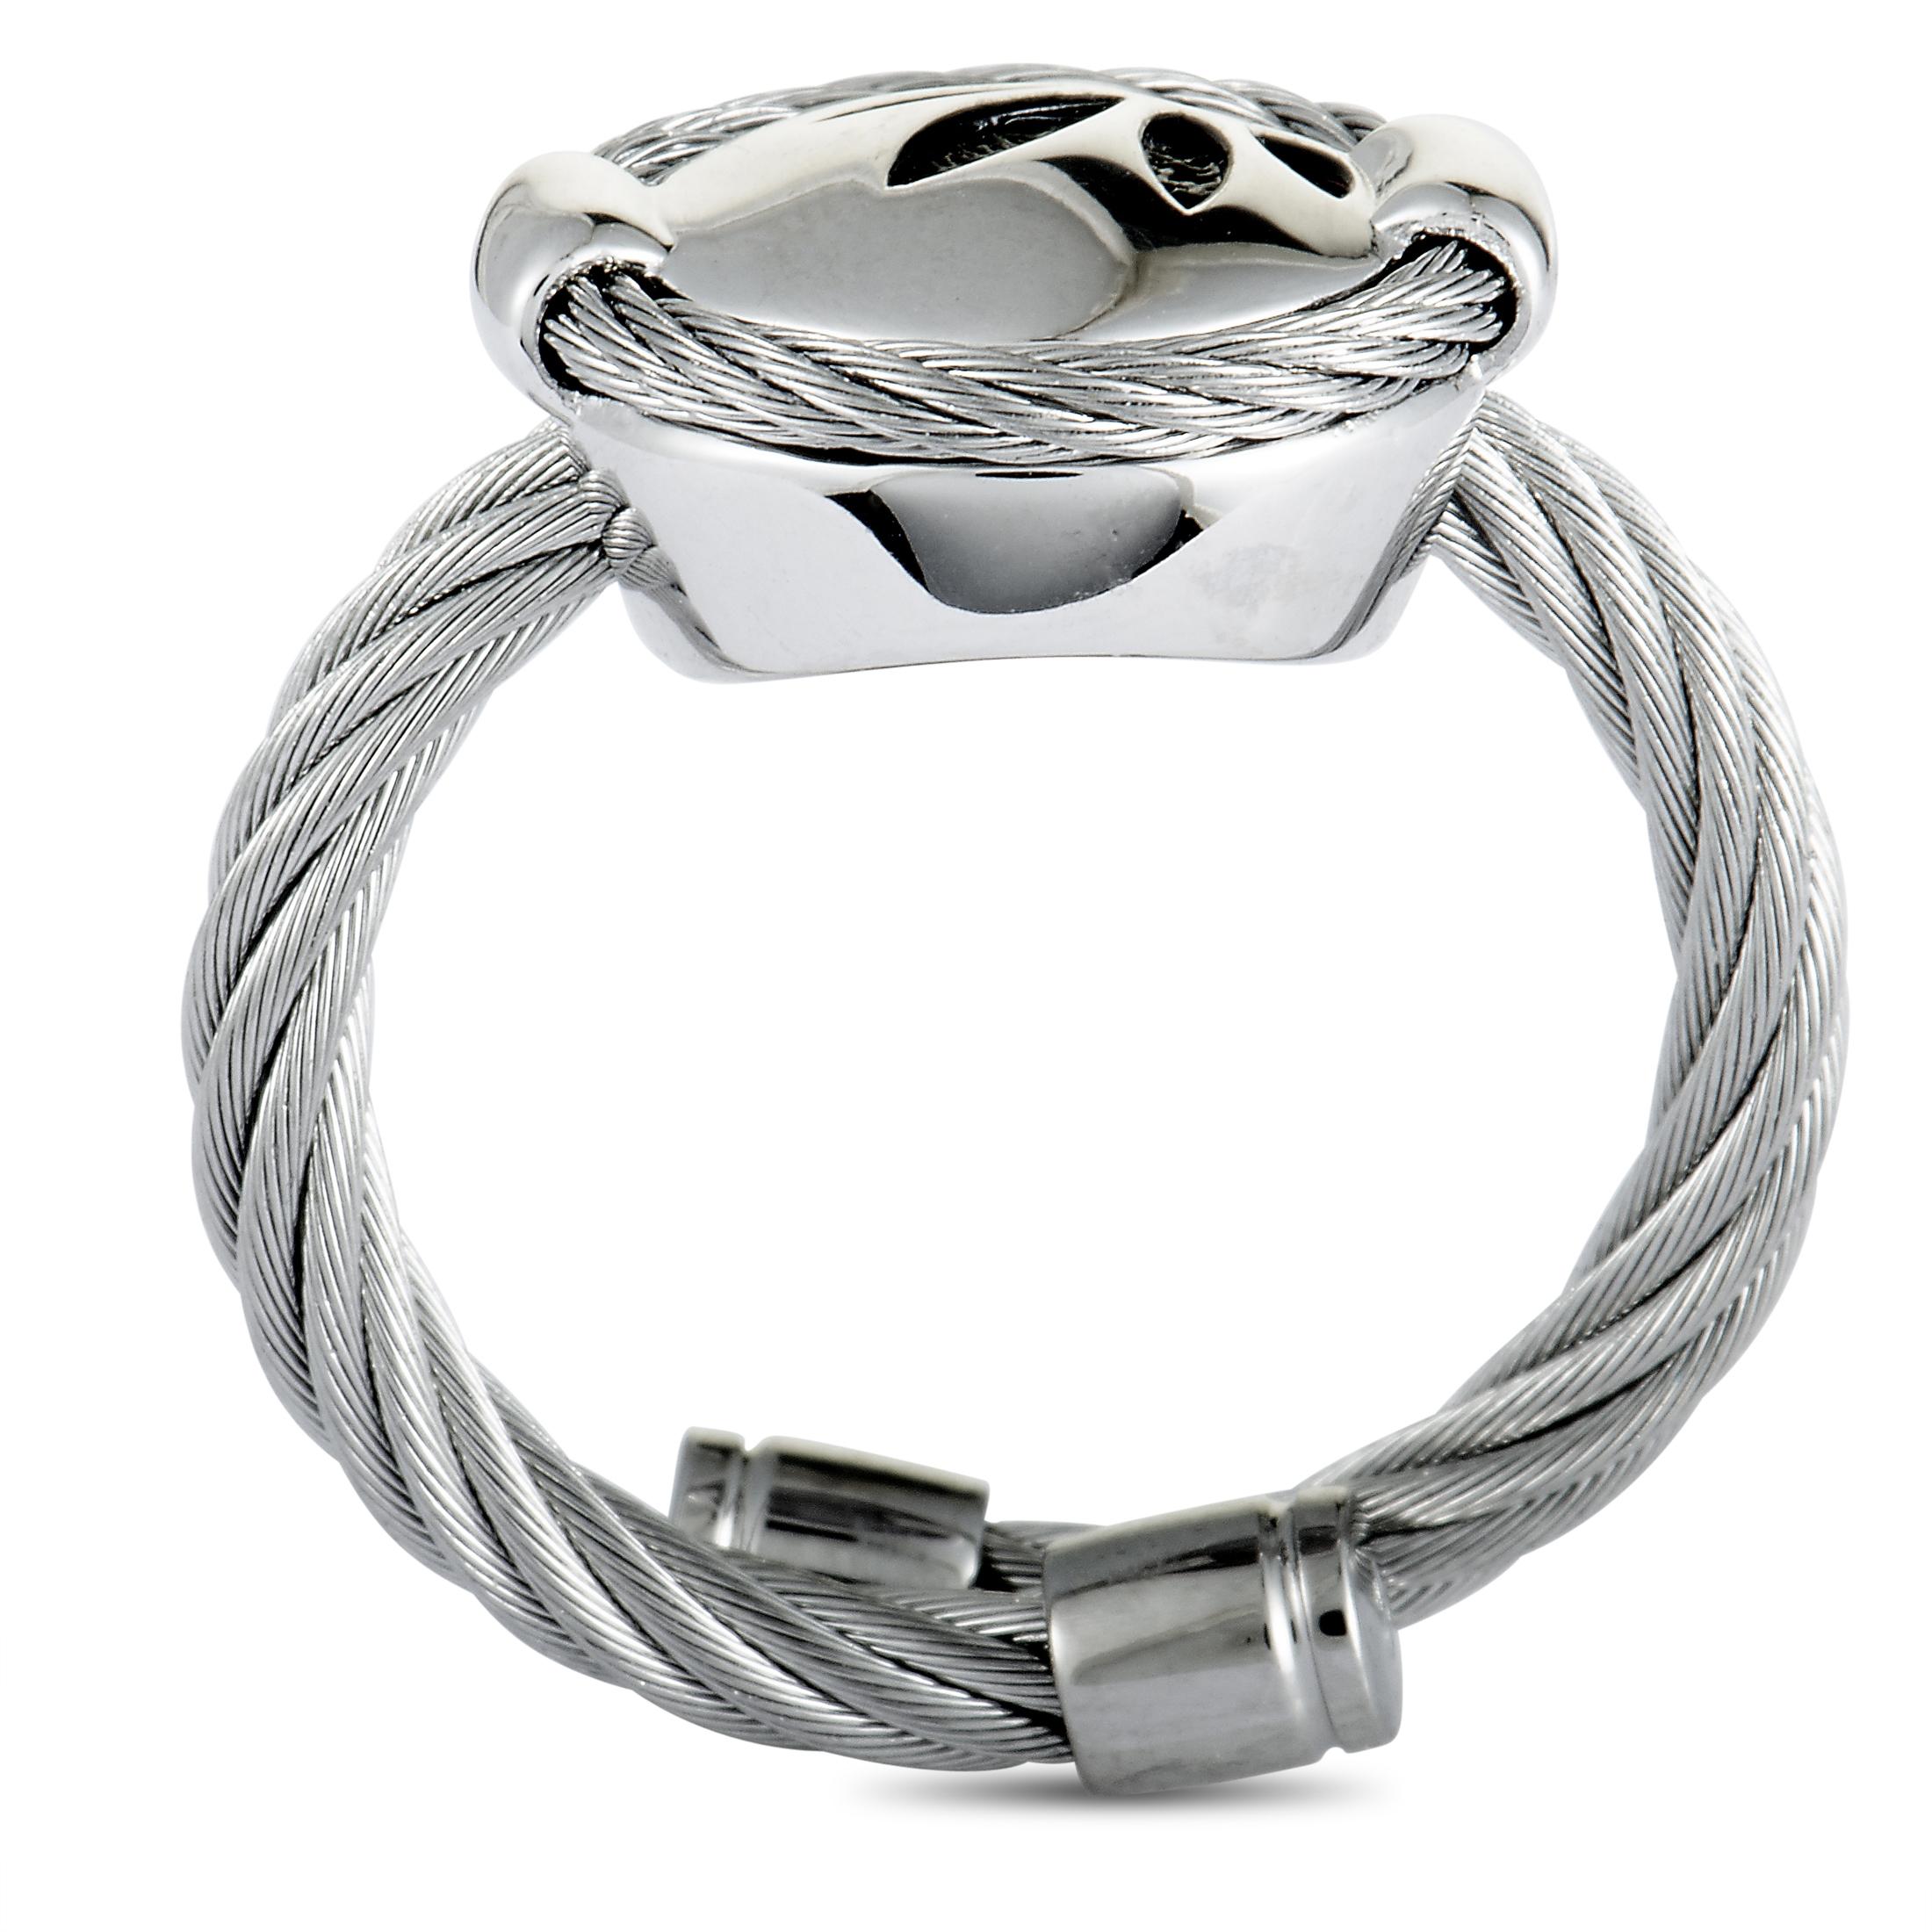 Designed in an incredibly attractive manner, boasting intricate cable motif and beautiful bamboo décor, this superb ring from Charriol offers a delightfully offbeat look. The ring is made of rhodium-plated stainless steel and it is embellished with